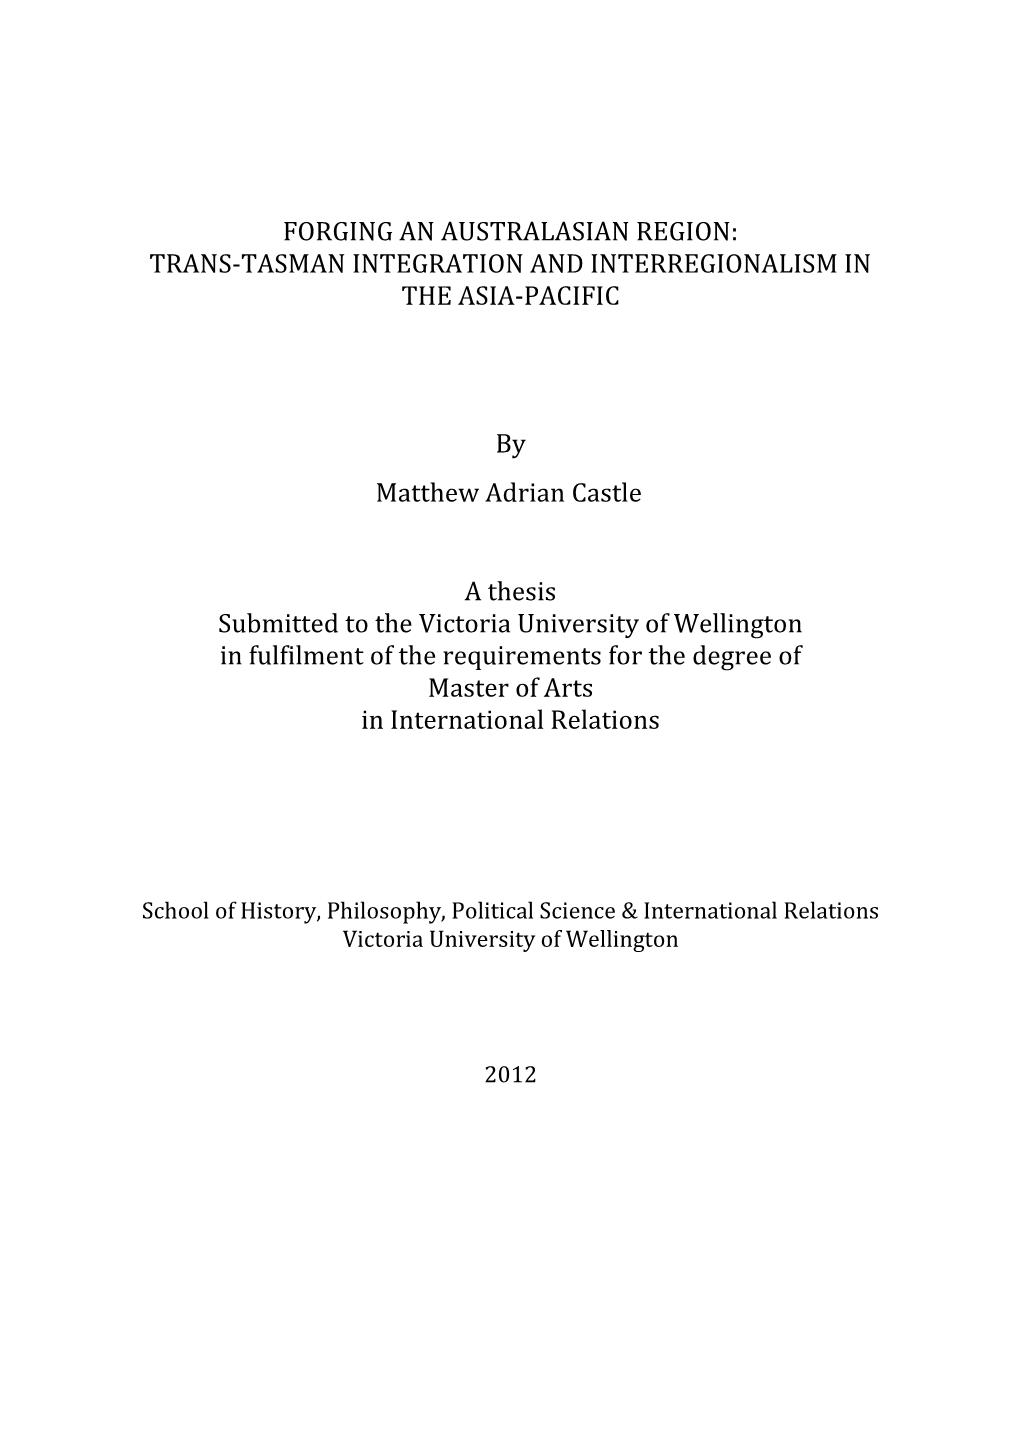 Trans-Tasman Integration and Interregionalism in the Asia-Pacific